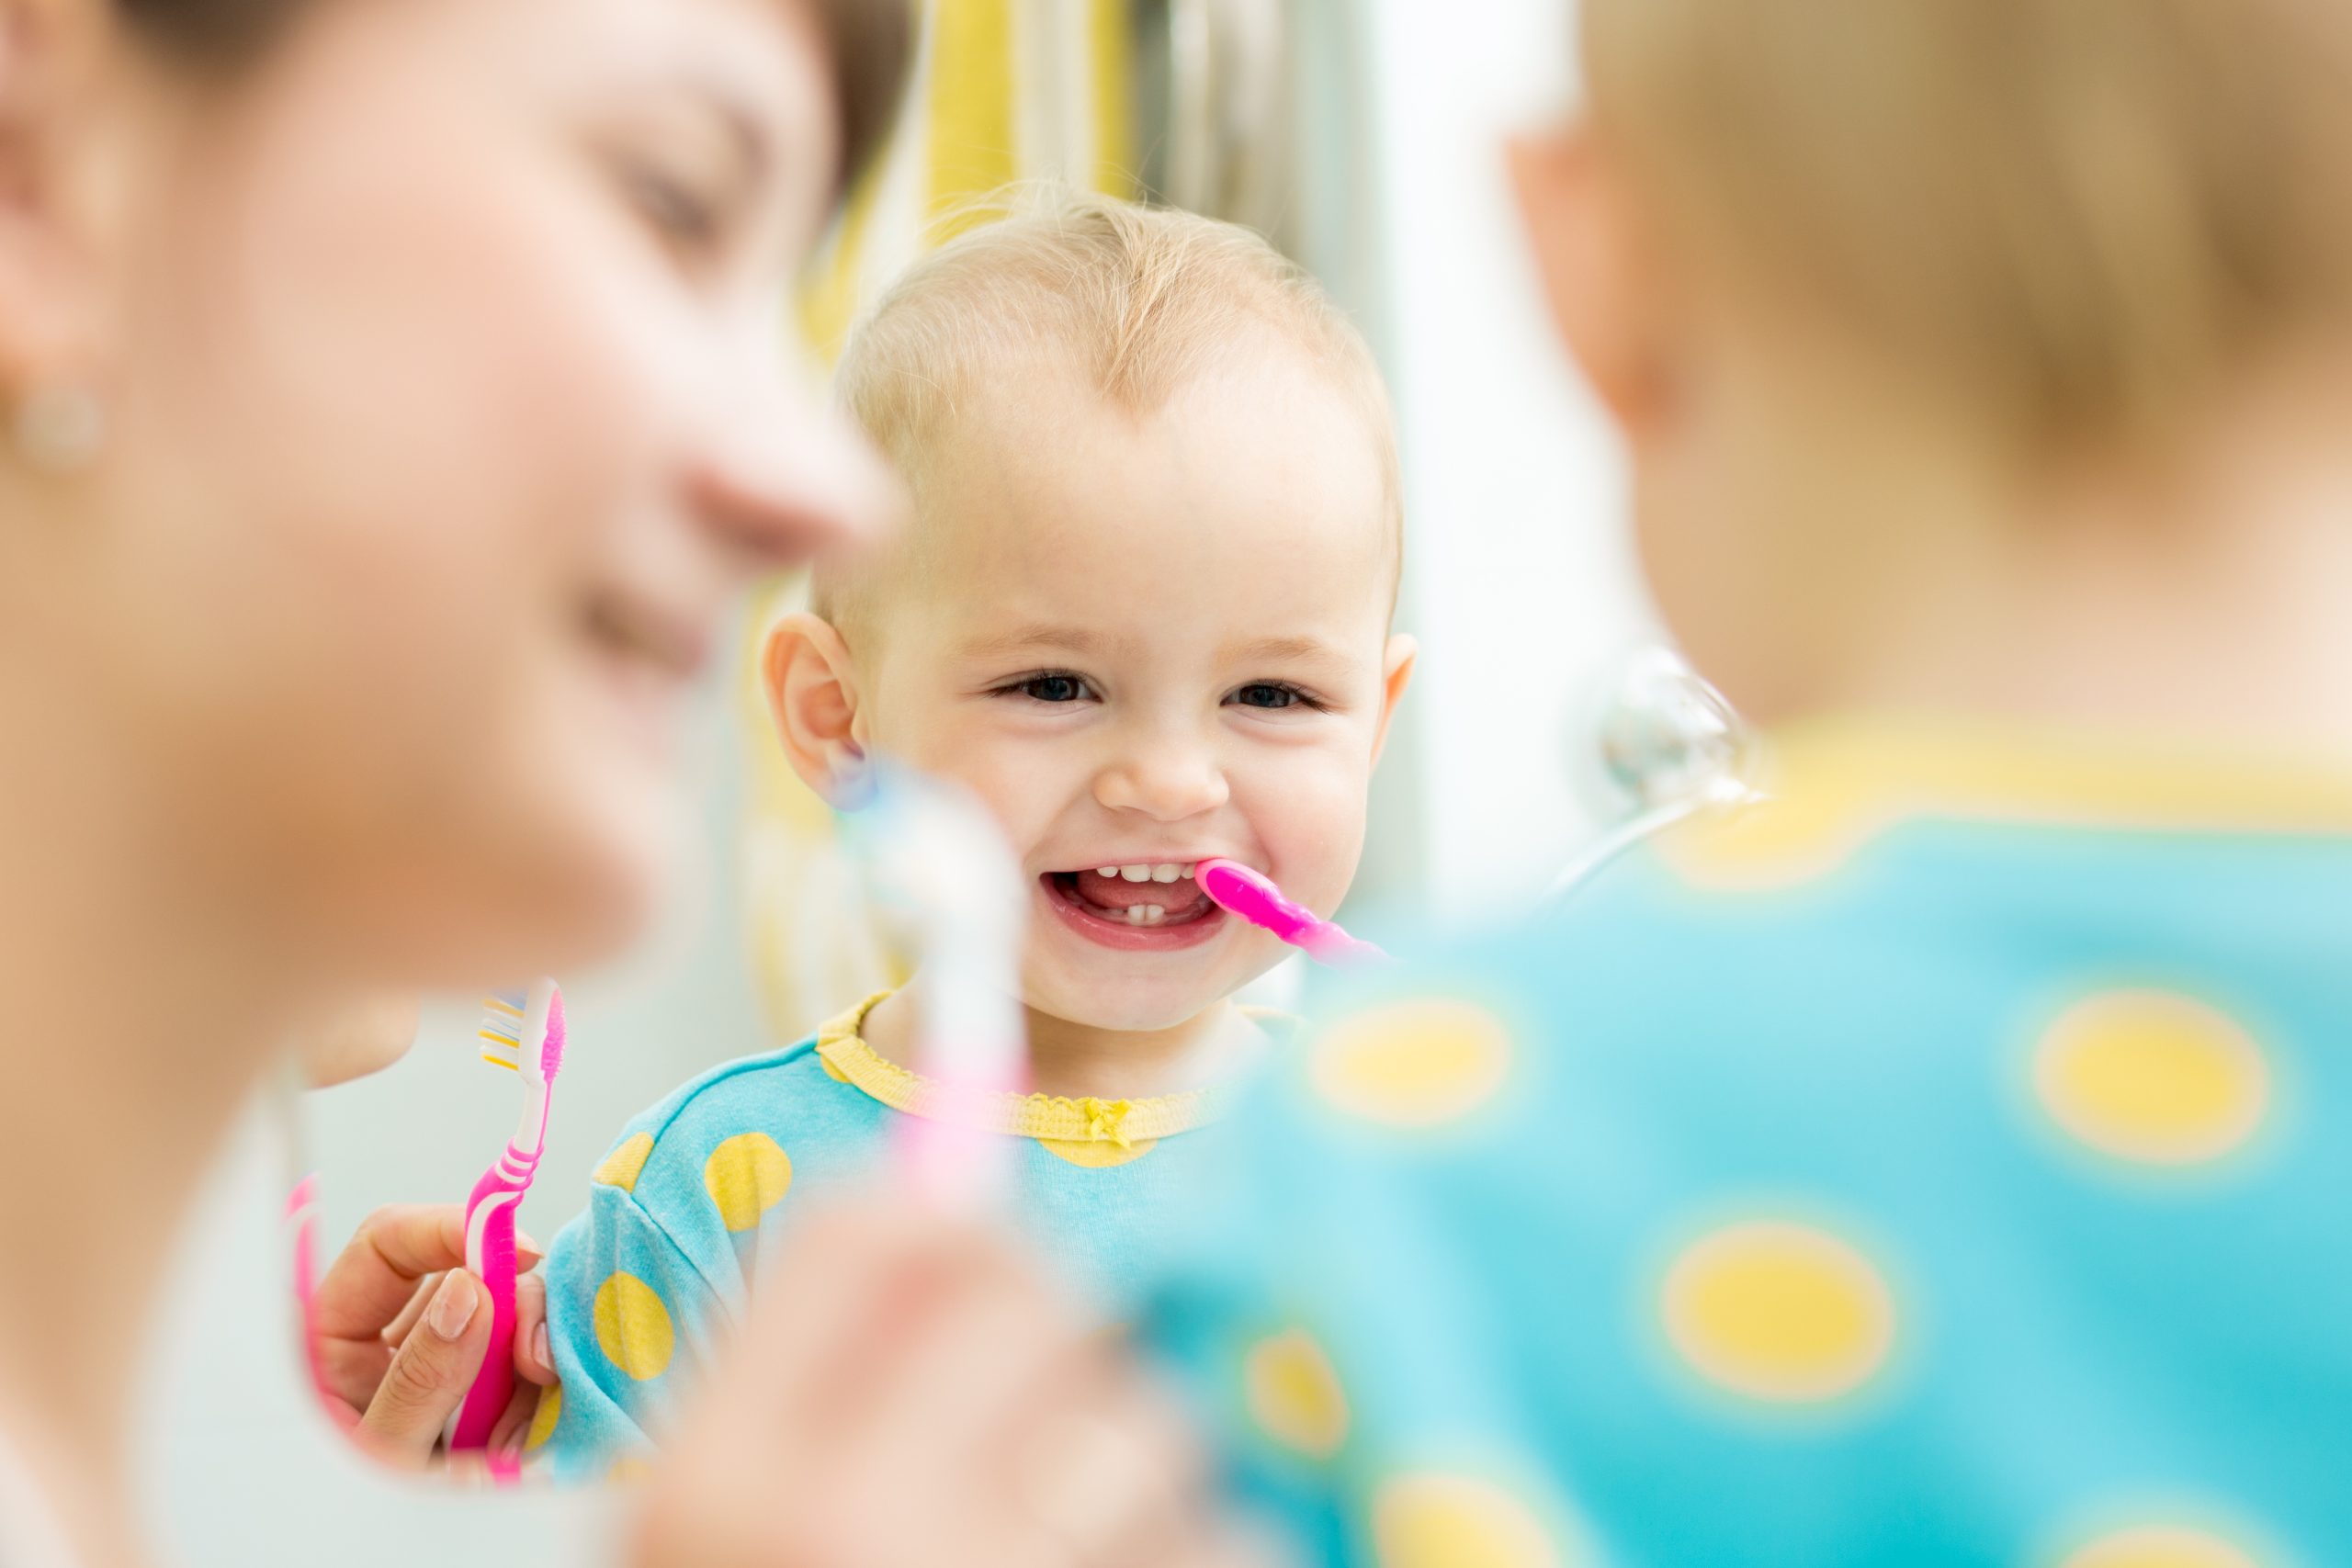 Make tooth brushing a habit as soon as the first tooth appears